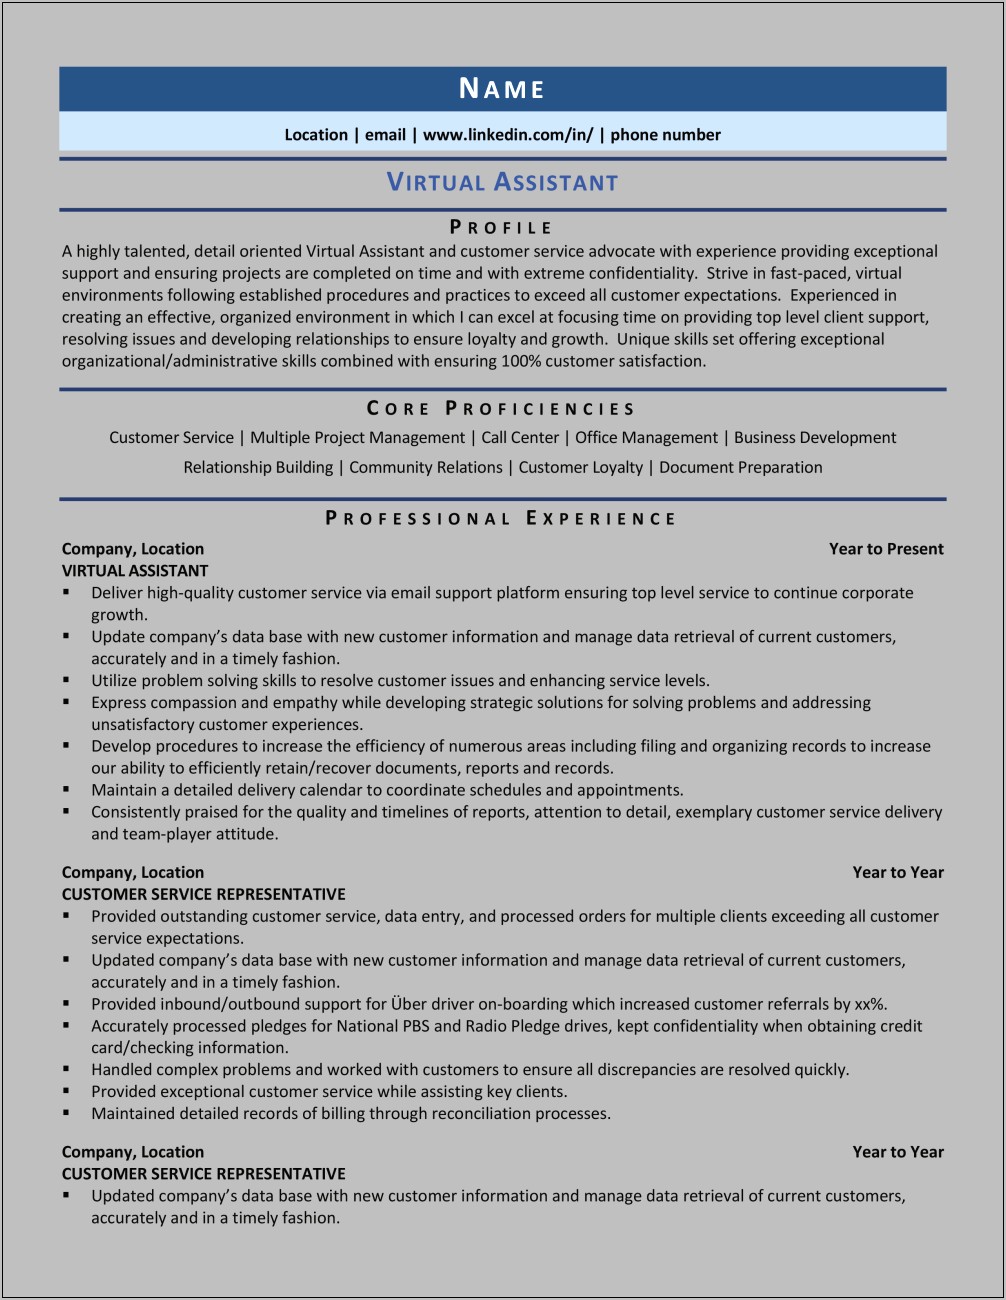 Sample Resume Human Services Assistant